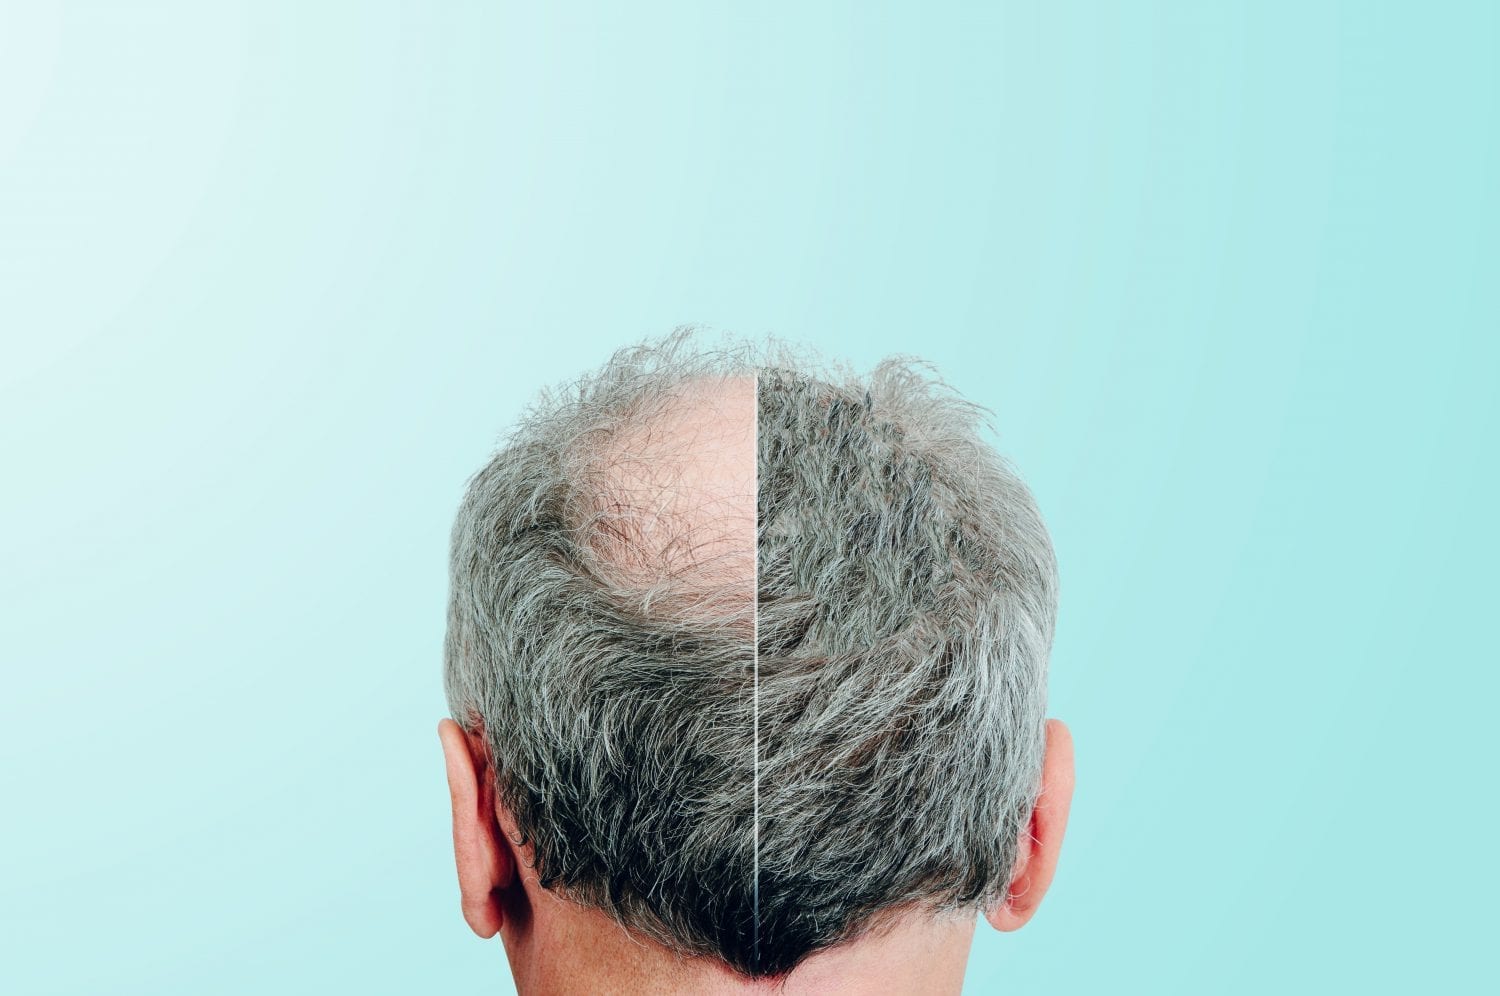 Hair Loss Treatment with PRP Injections - Virginia, and Maryland